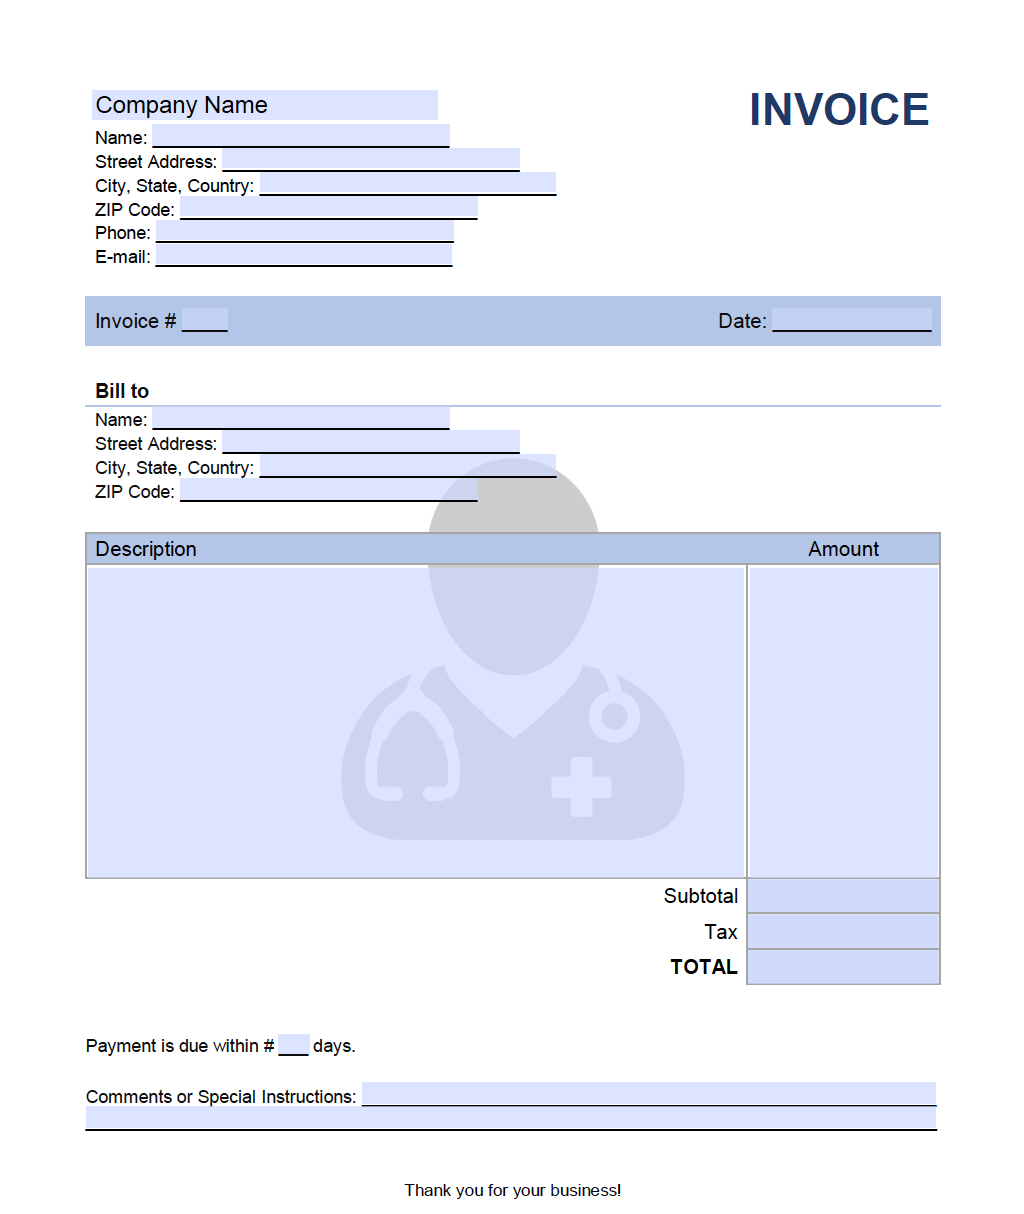 Doctor (Physician) Invoice Template - Onlineinvoice throughout Doctors Invoice Template